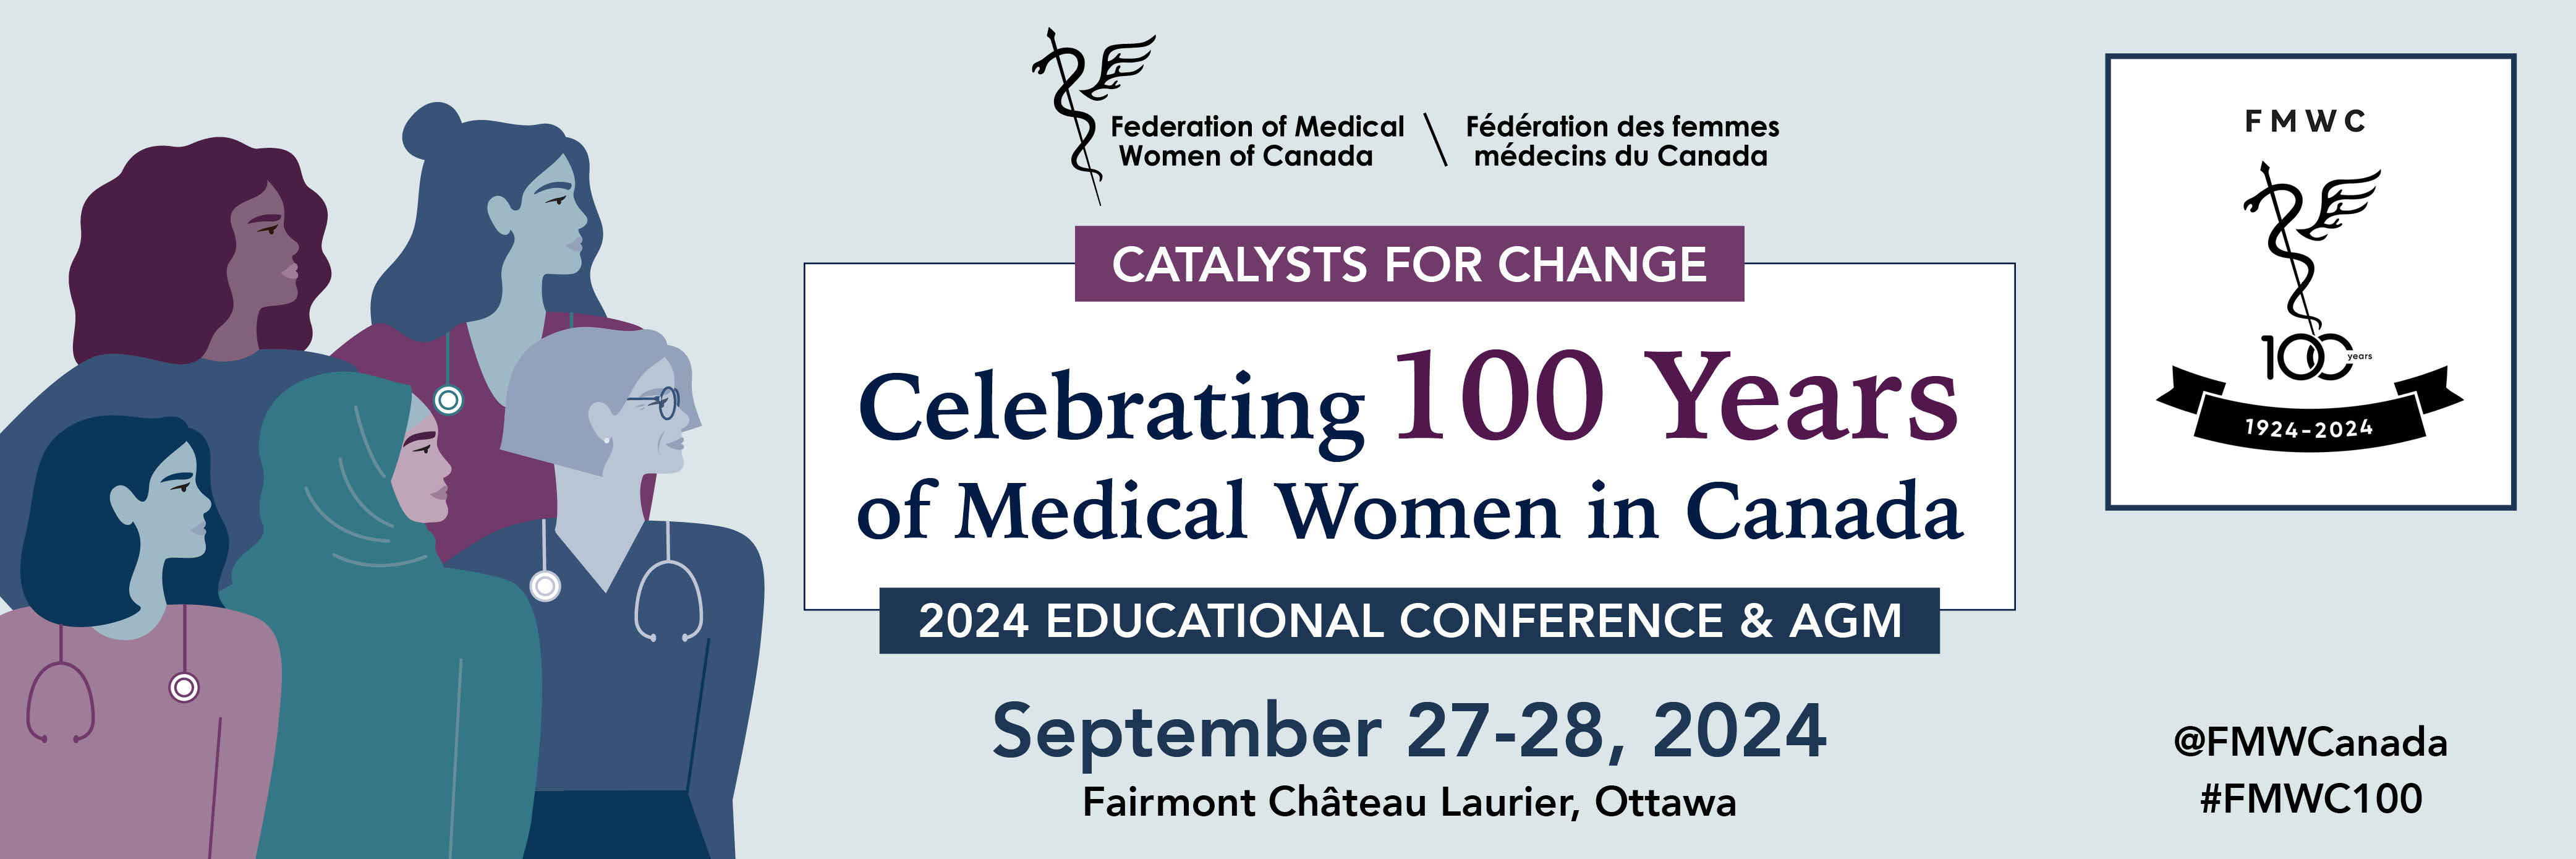 Federation of Medical Women of Canada 2024 Educational Conference and AGM: Celebrating 100 Years in Medical Women in Canada